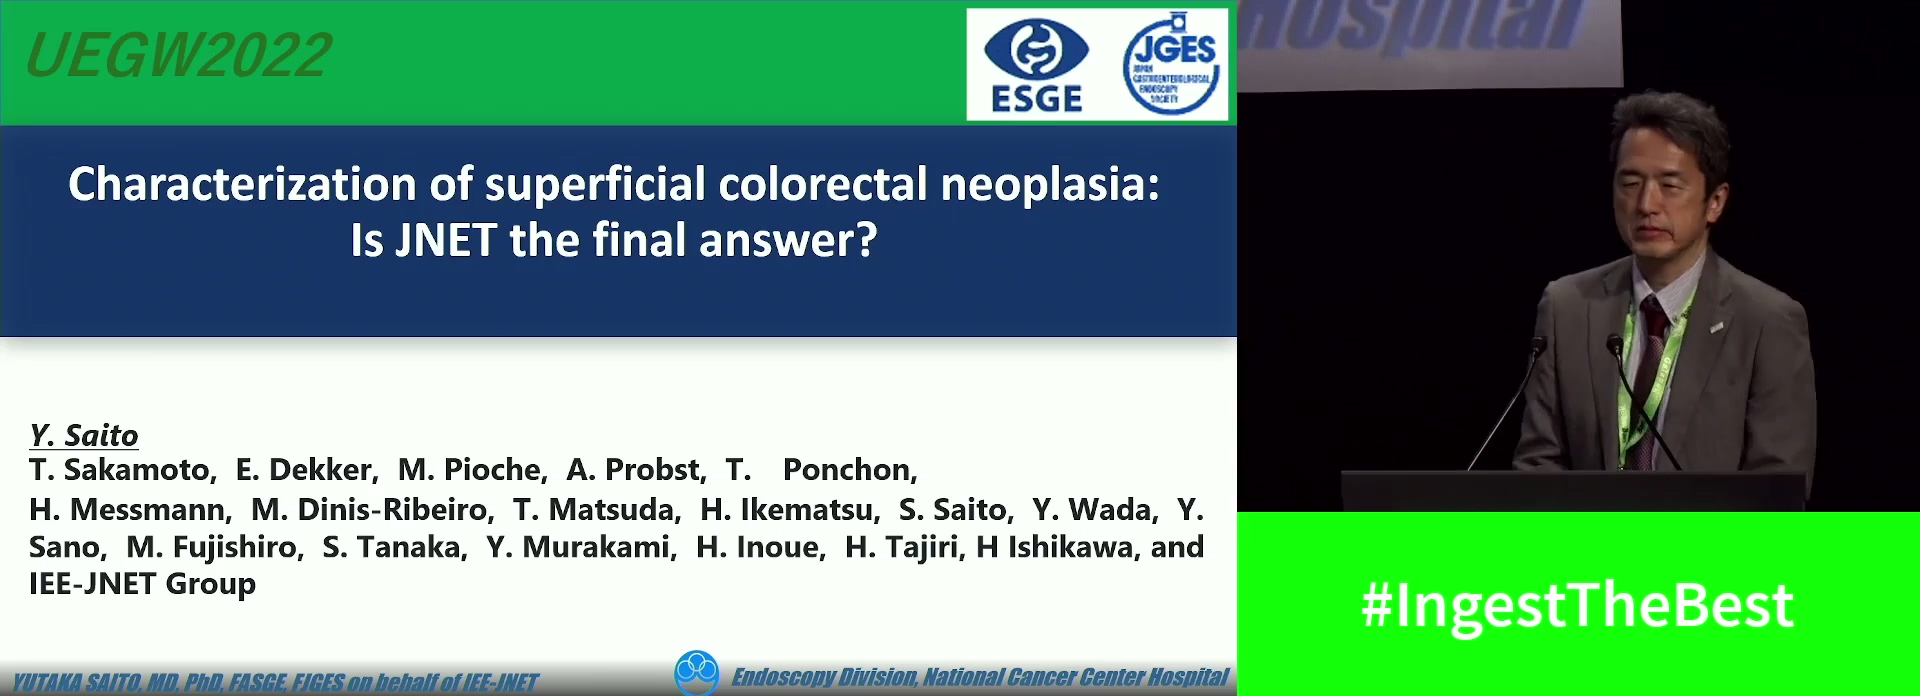 Characterisation of superficial colorectal neoplasia: Is JNET the final answer?